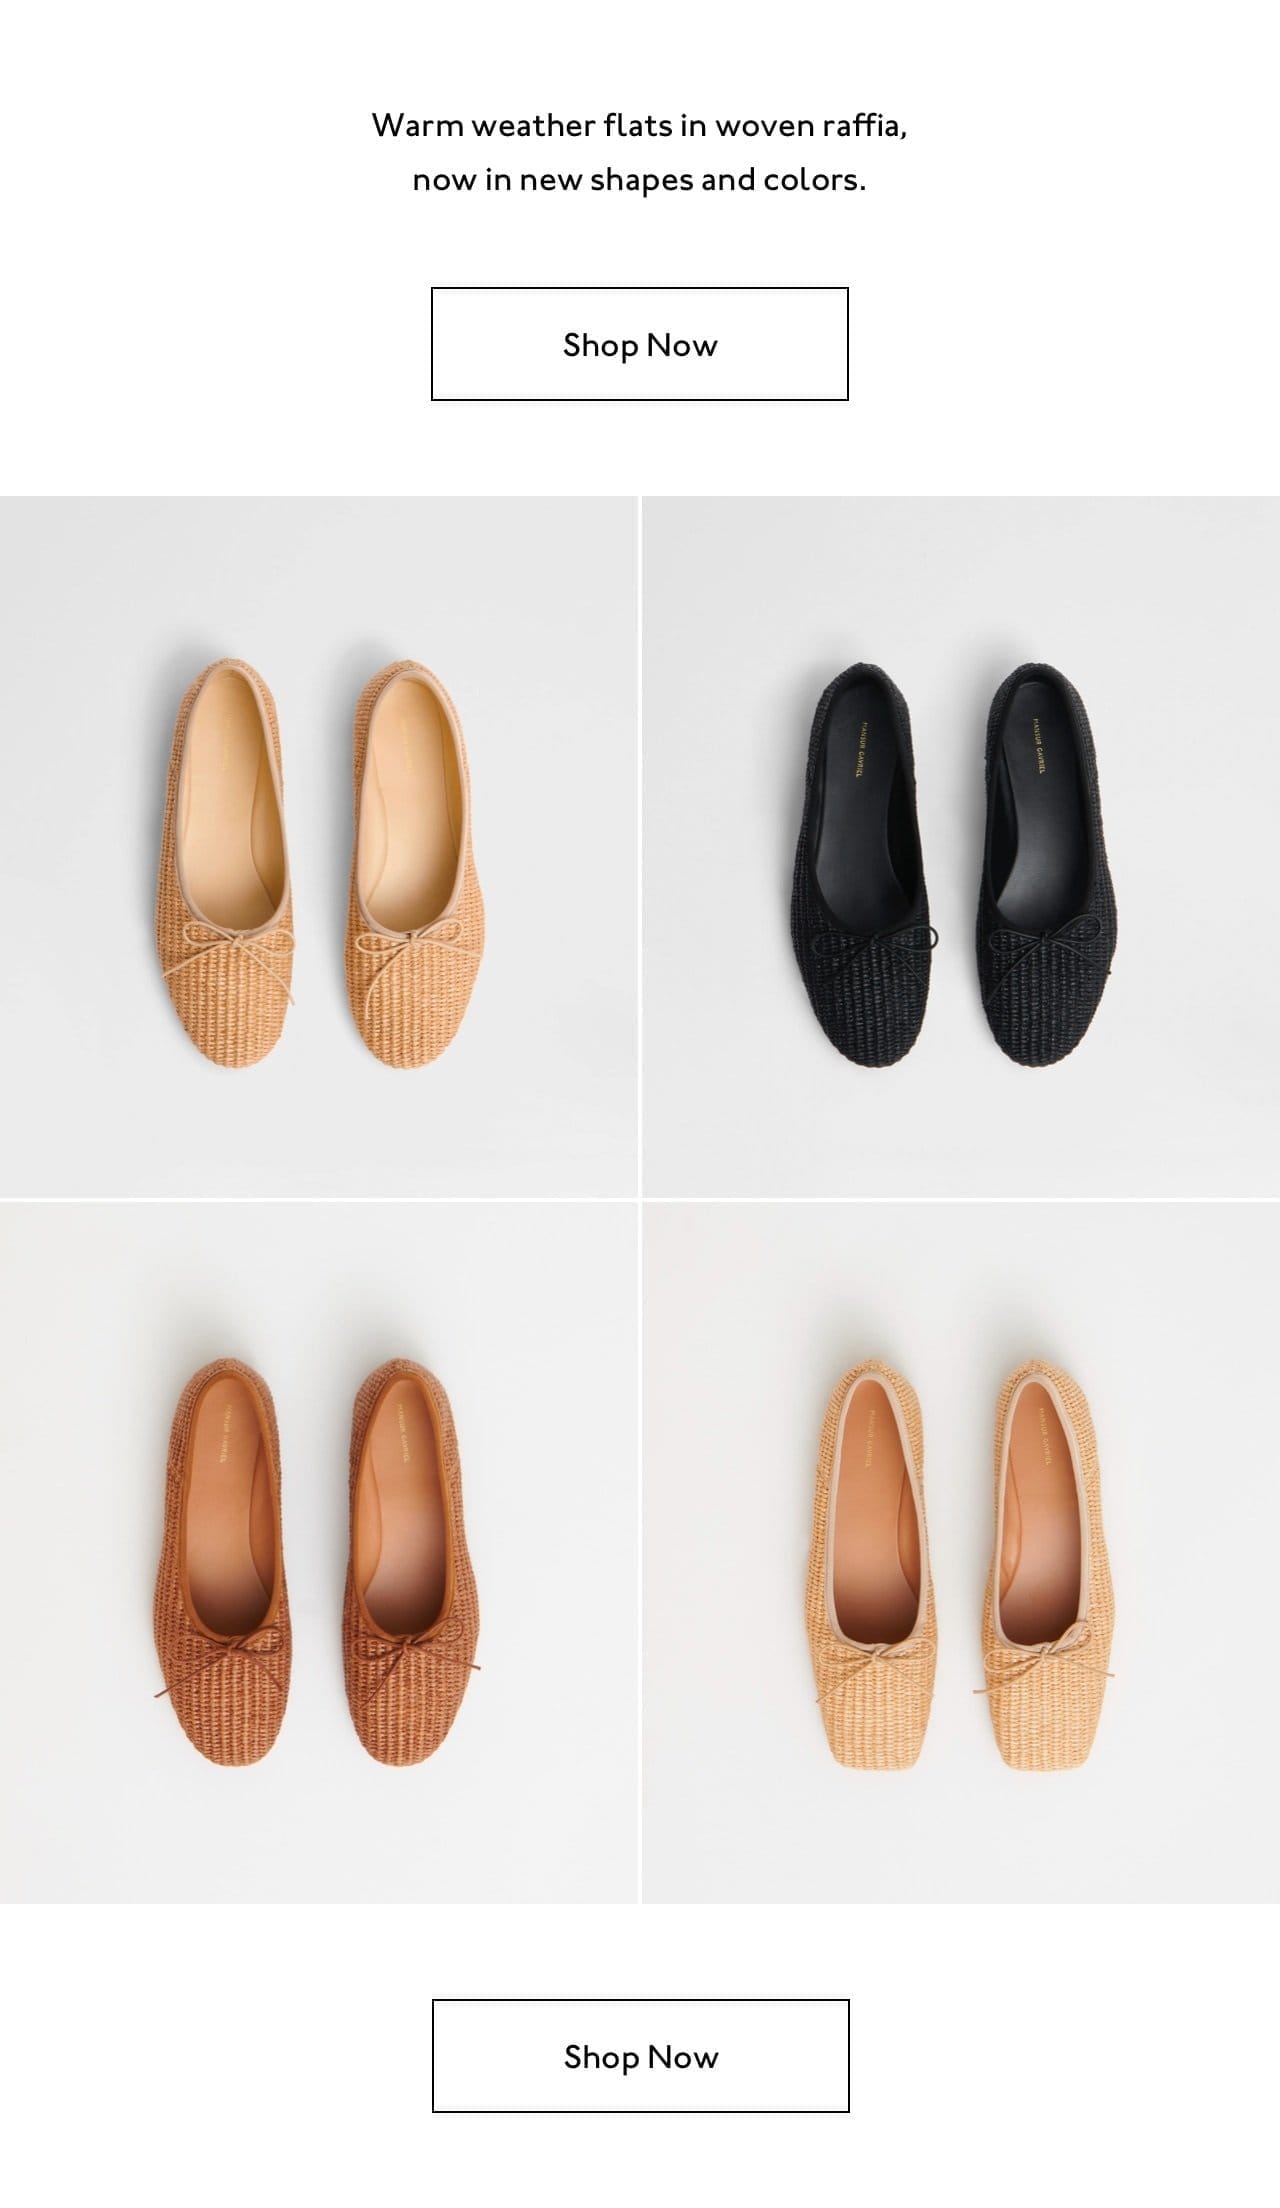 Warm weather flats in woven raffia, now in new shapes and colors.